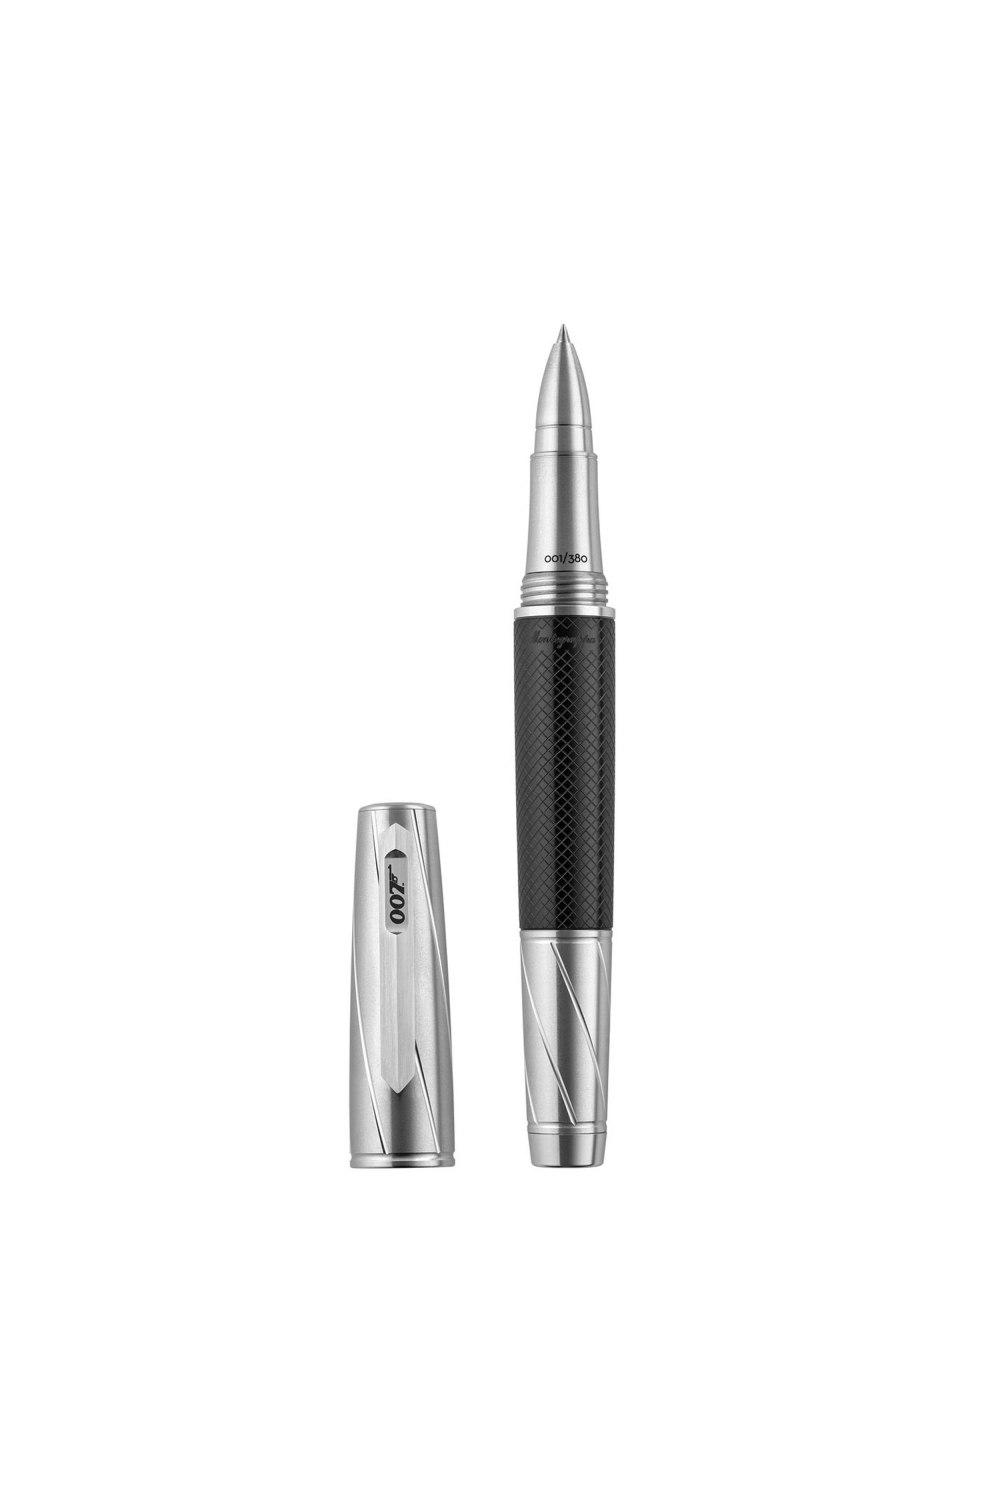 MONTEGRAPPA - 007 Spymaster Duo RollerBall